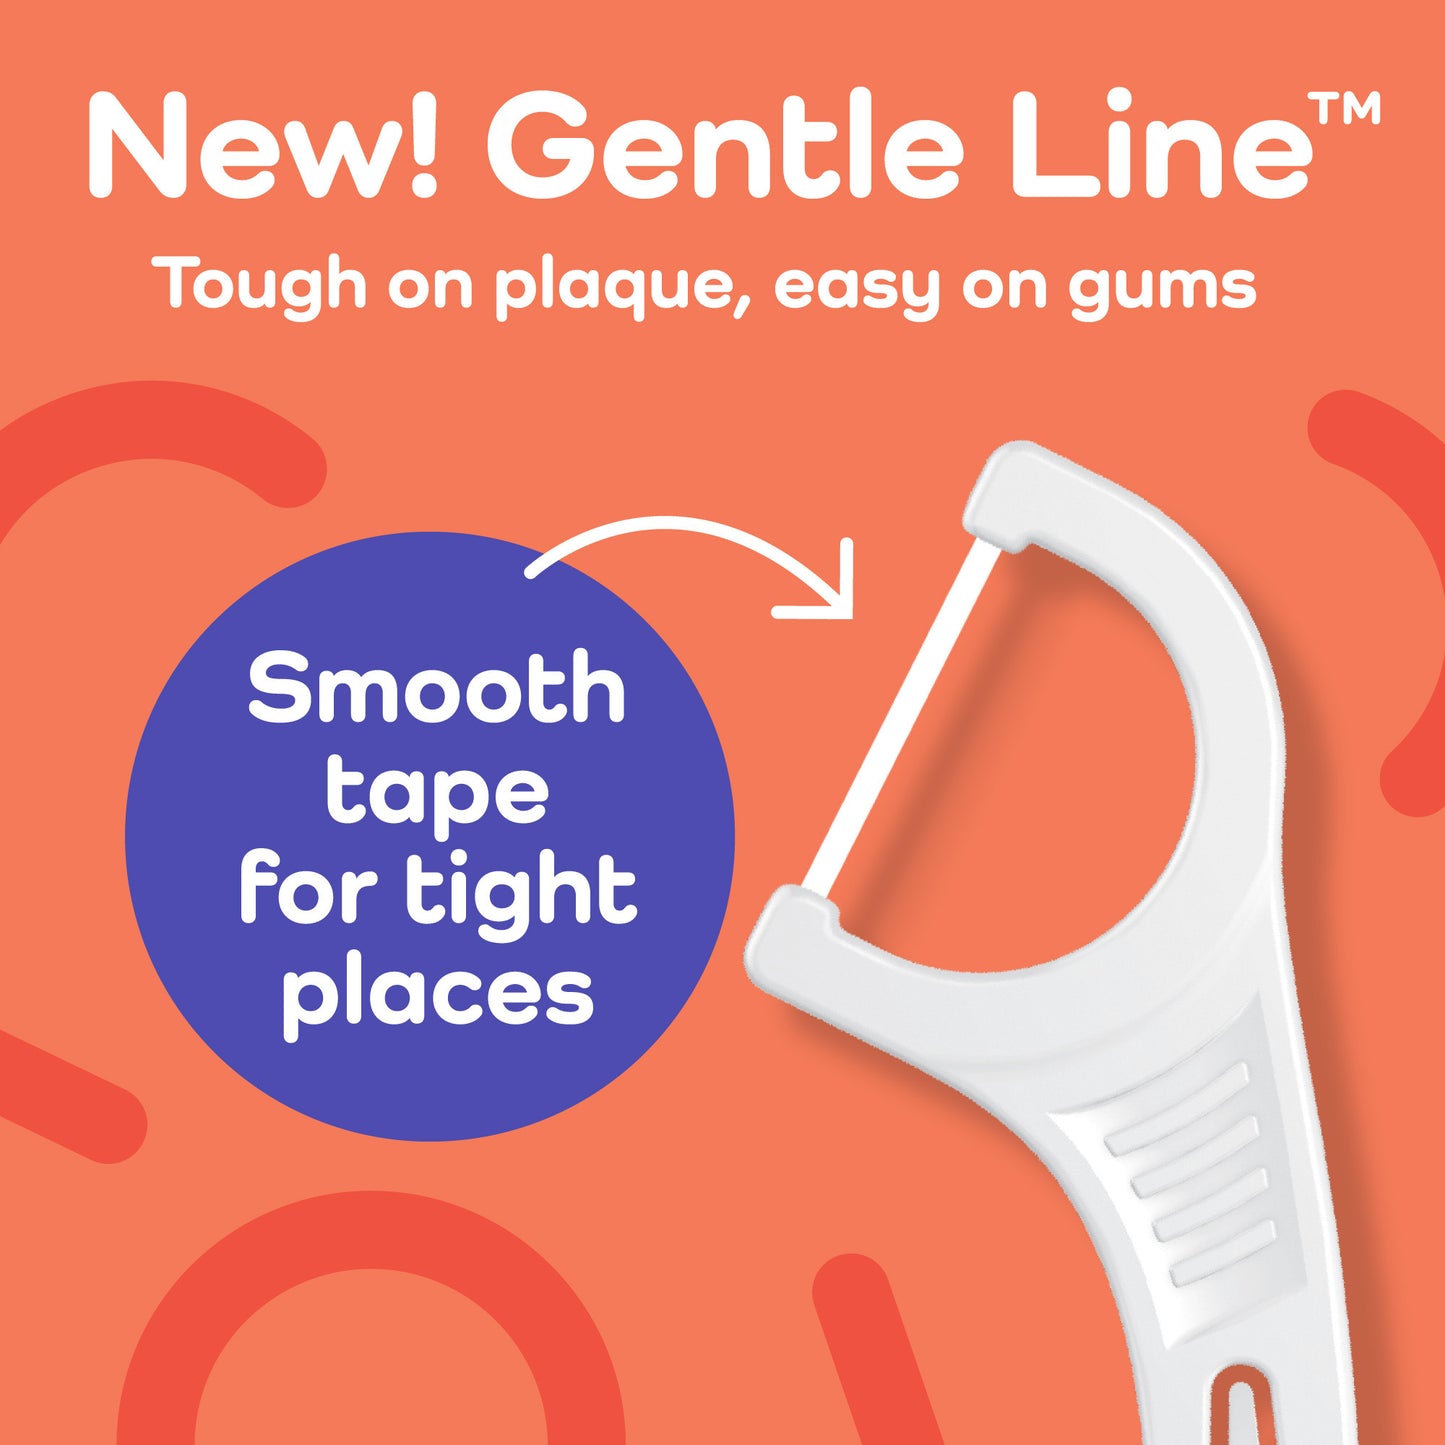  New gentle line. Tough on plaque, easy on gums. Smooth tape for tight places